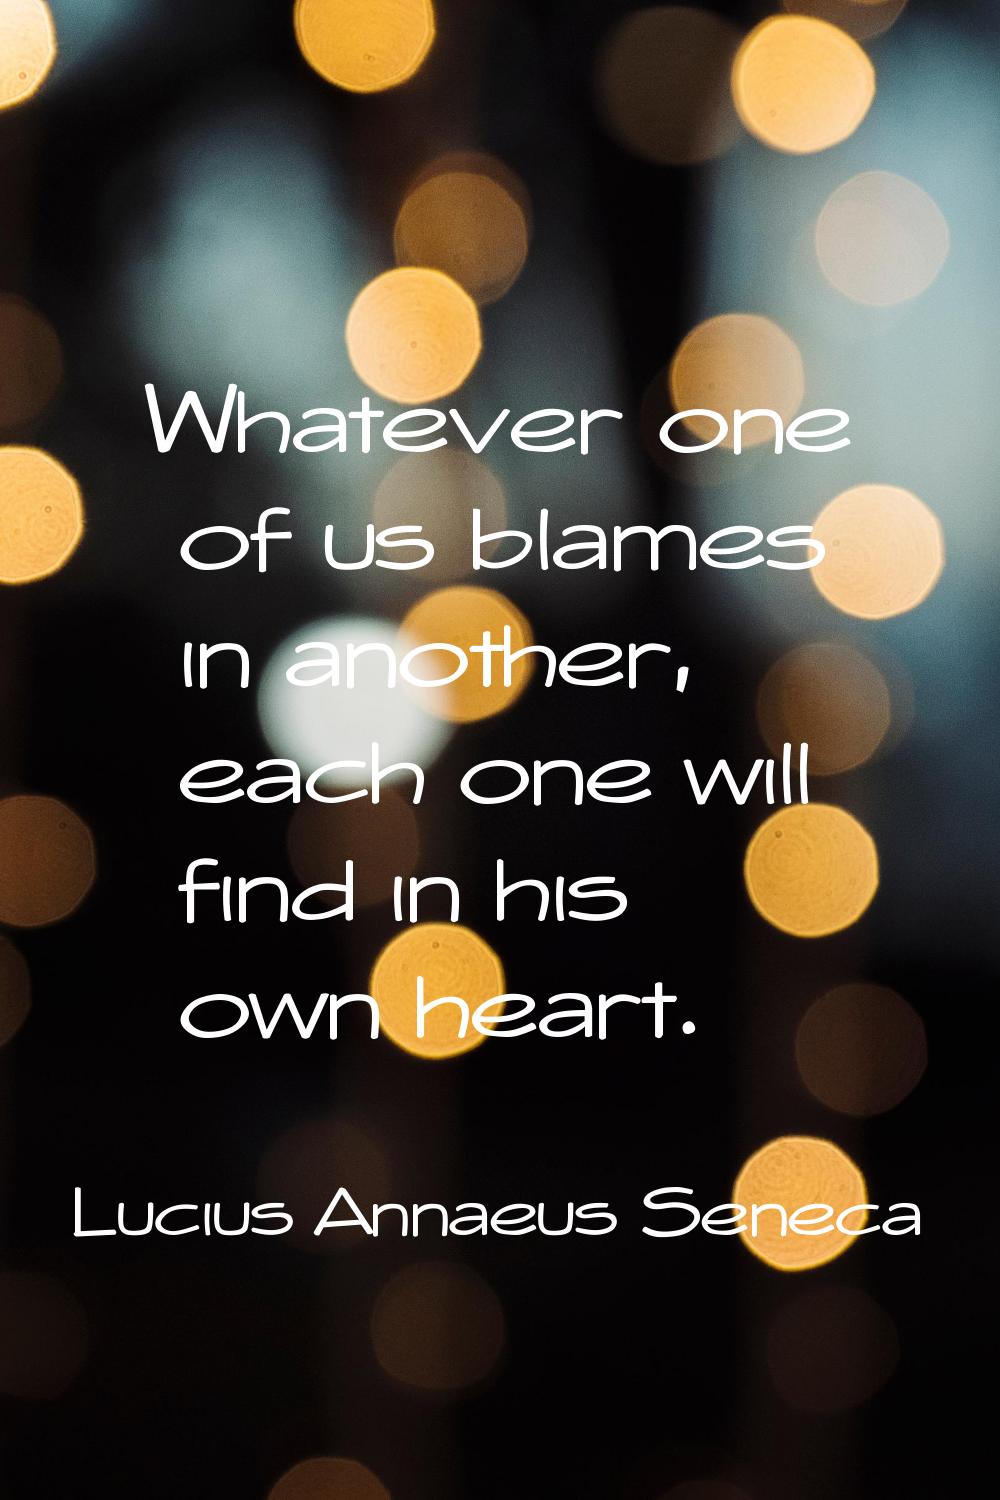 Whatever one of us blames in another, each one will find in his own heart.